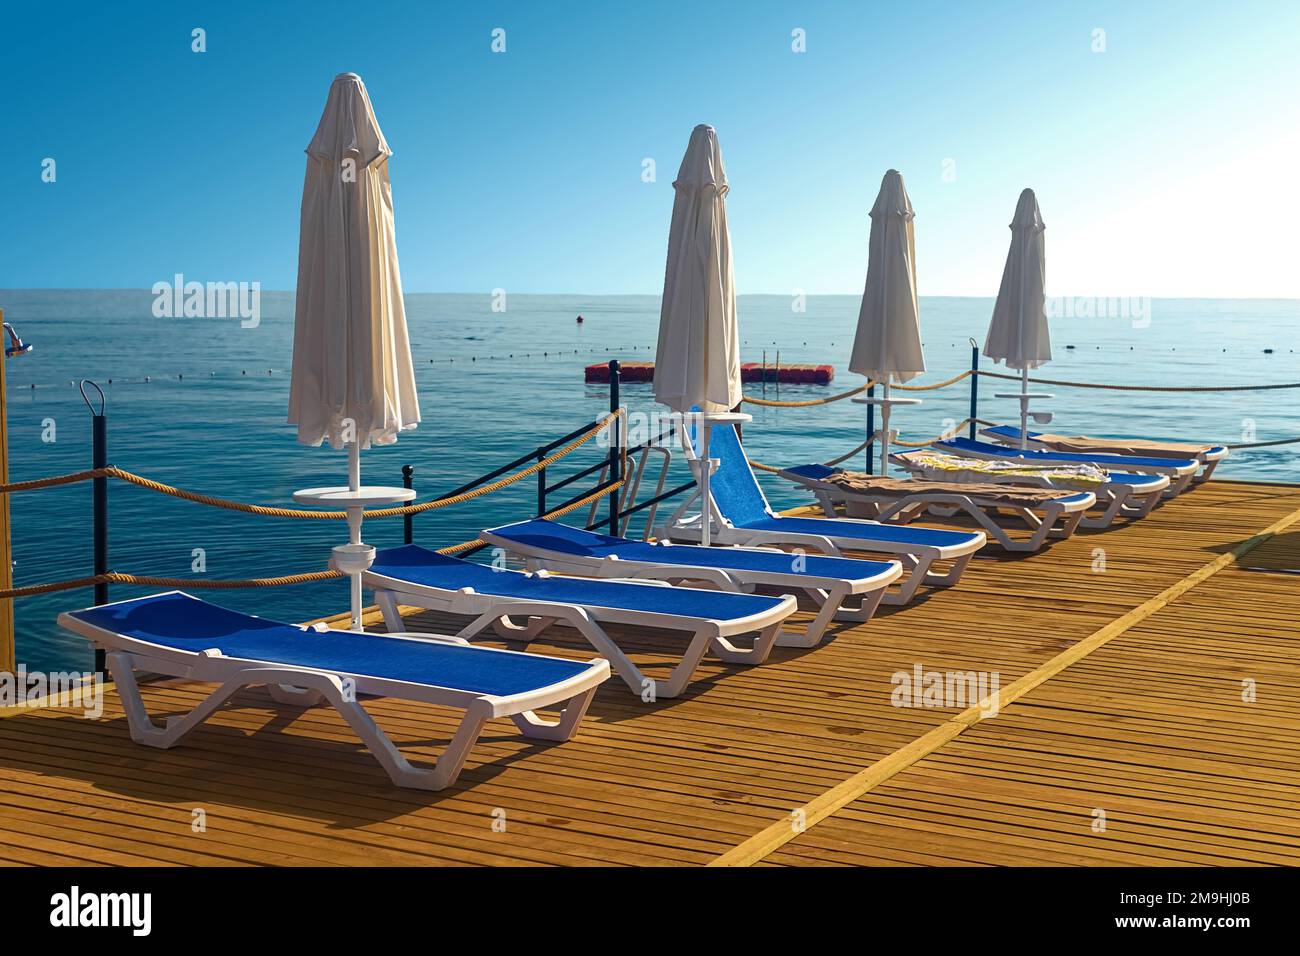 View of the pier with blue sun loungers and white umbrellas on the seashore in Kemer. Turkey Stock Photo